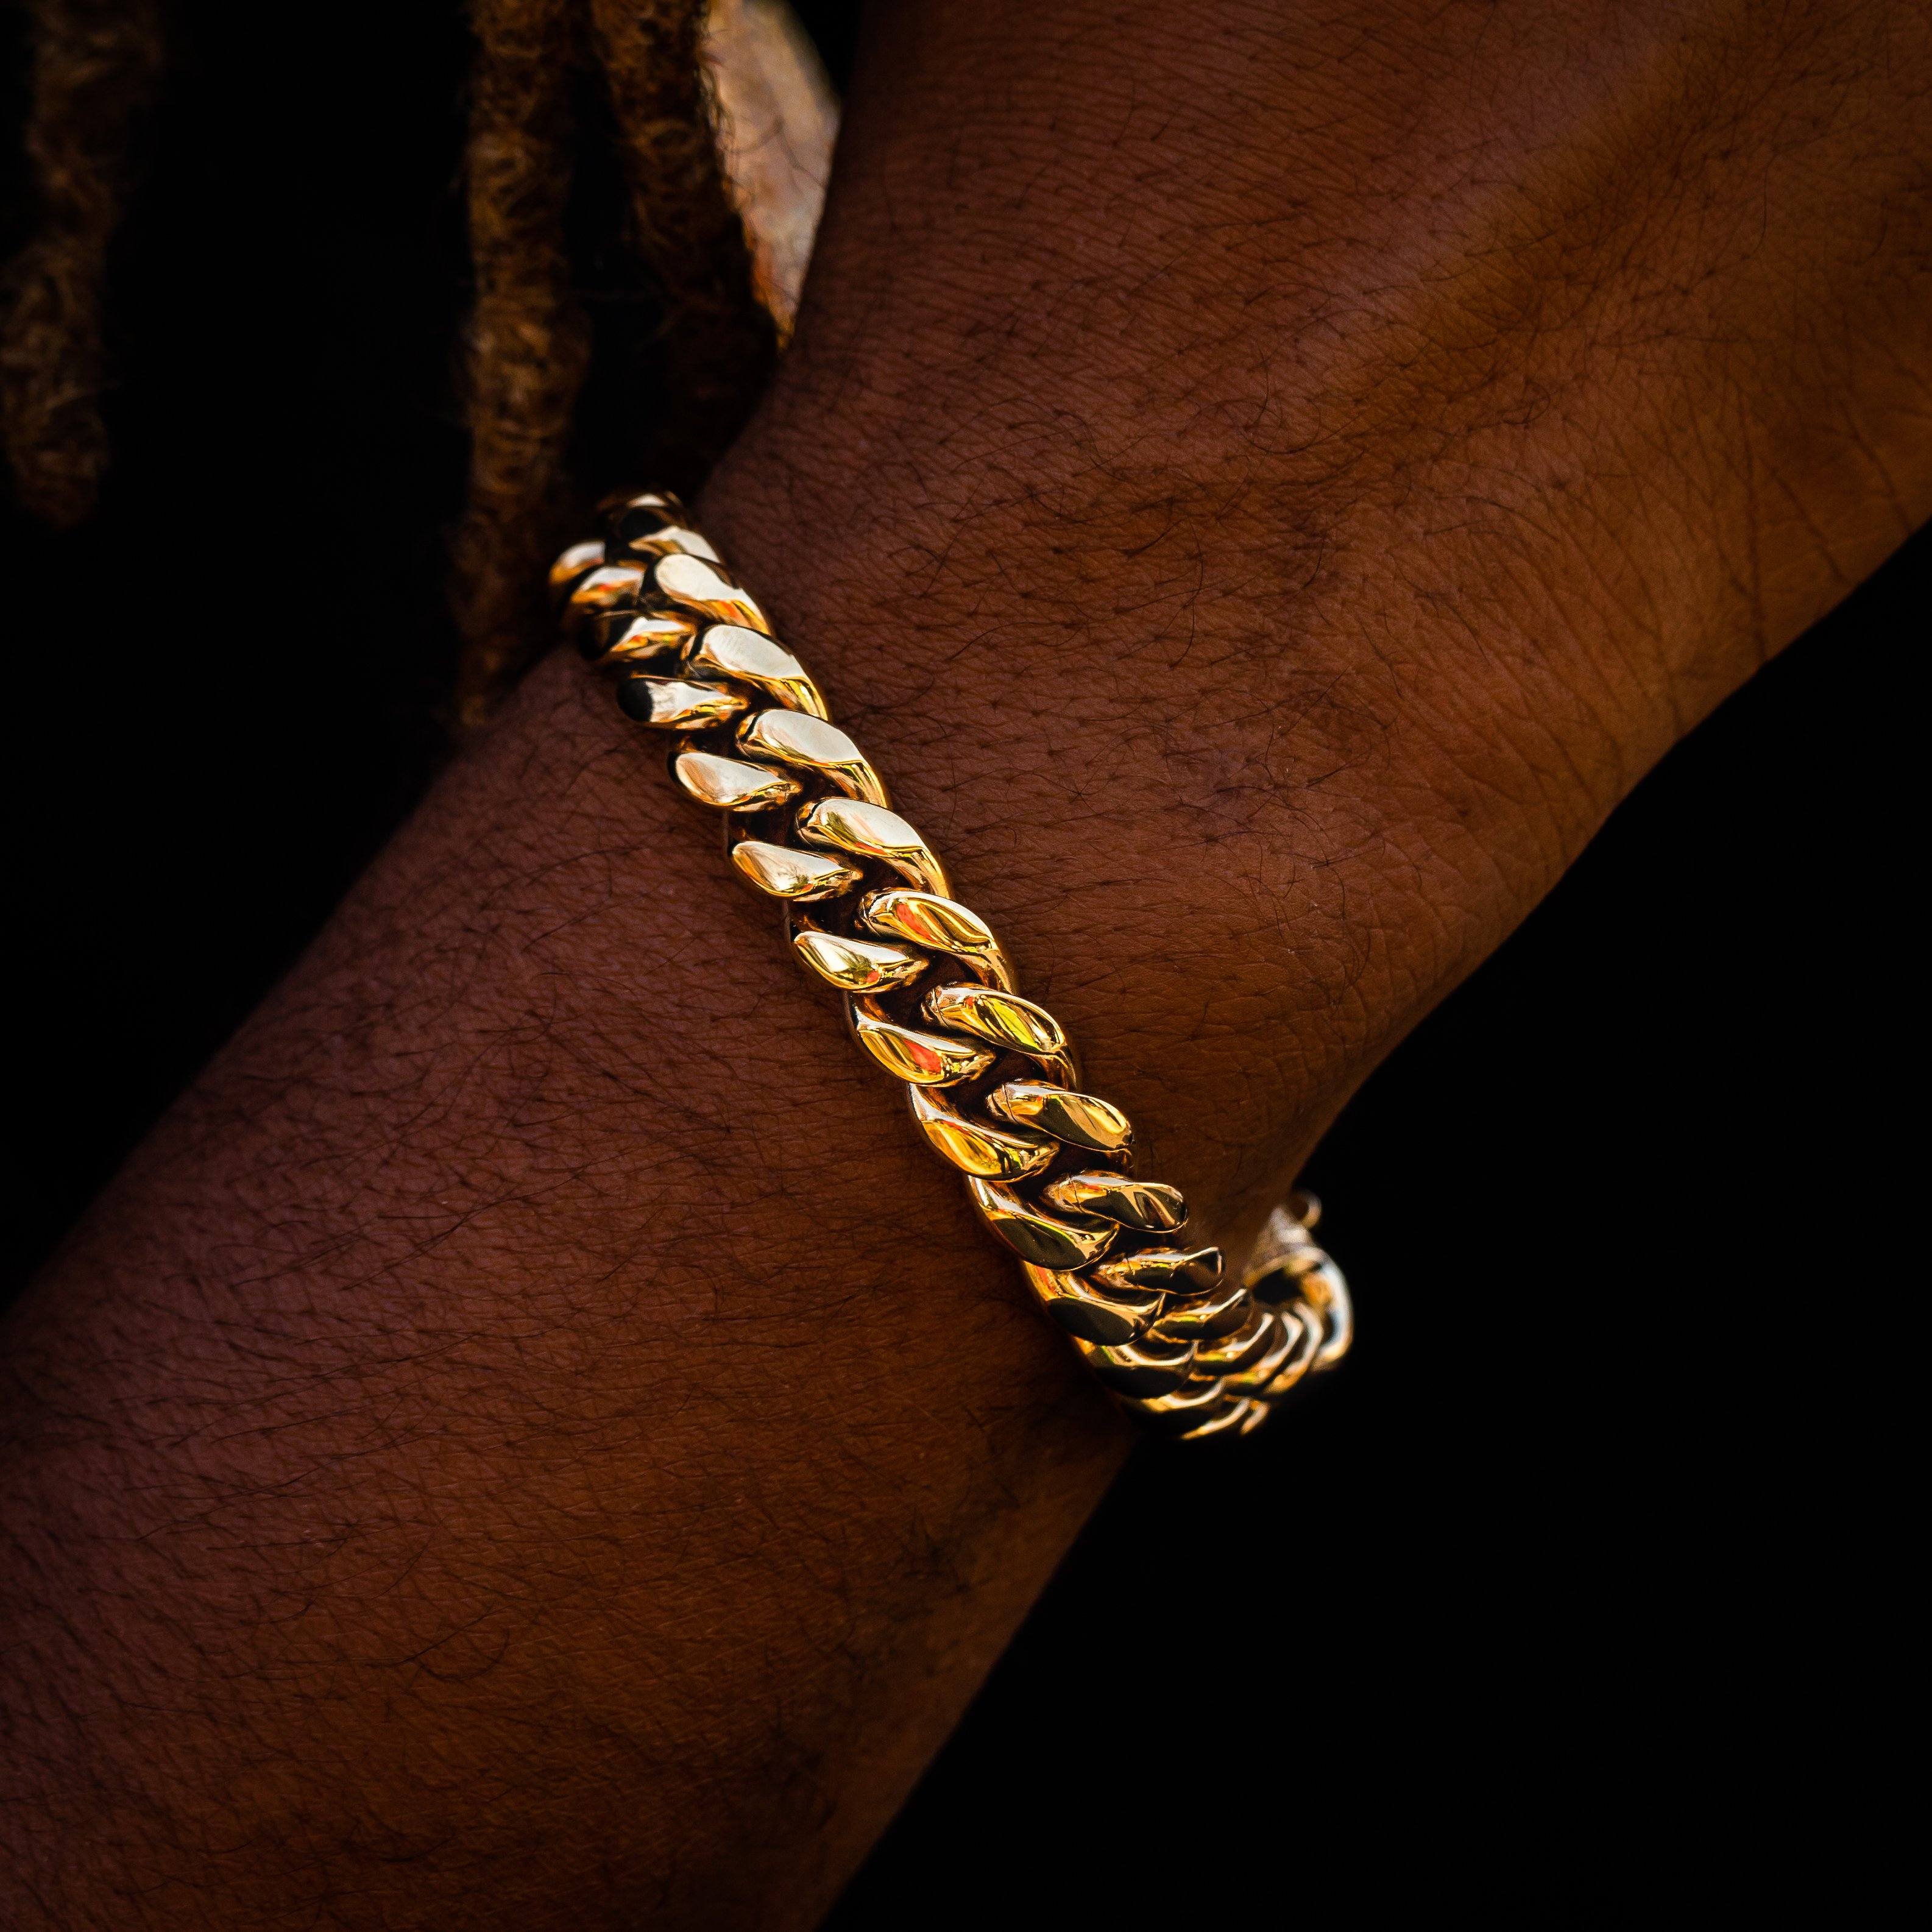 12mm Gold Miami Cuban Chain Bracelet - Spicy Ice